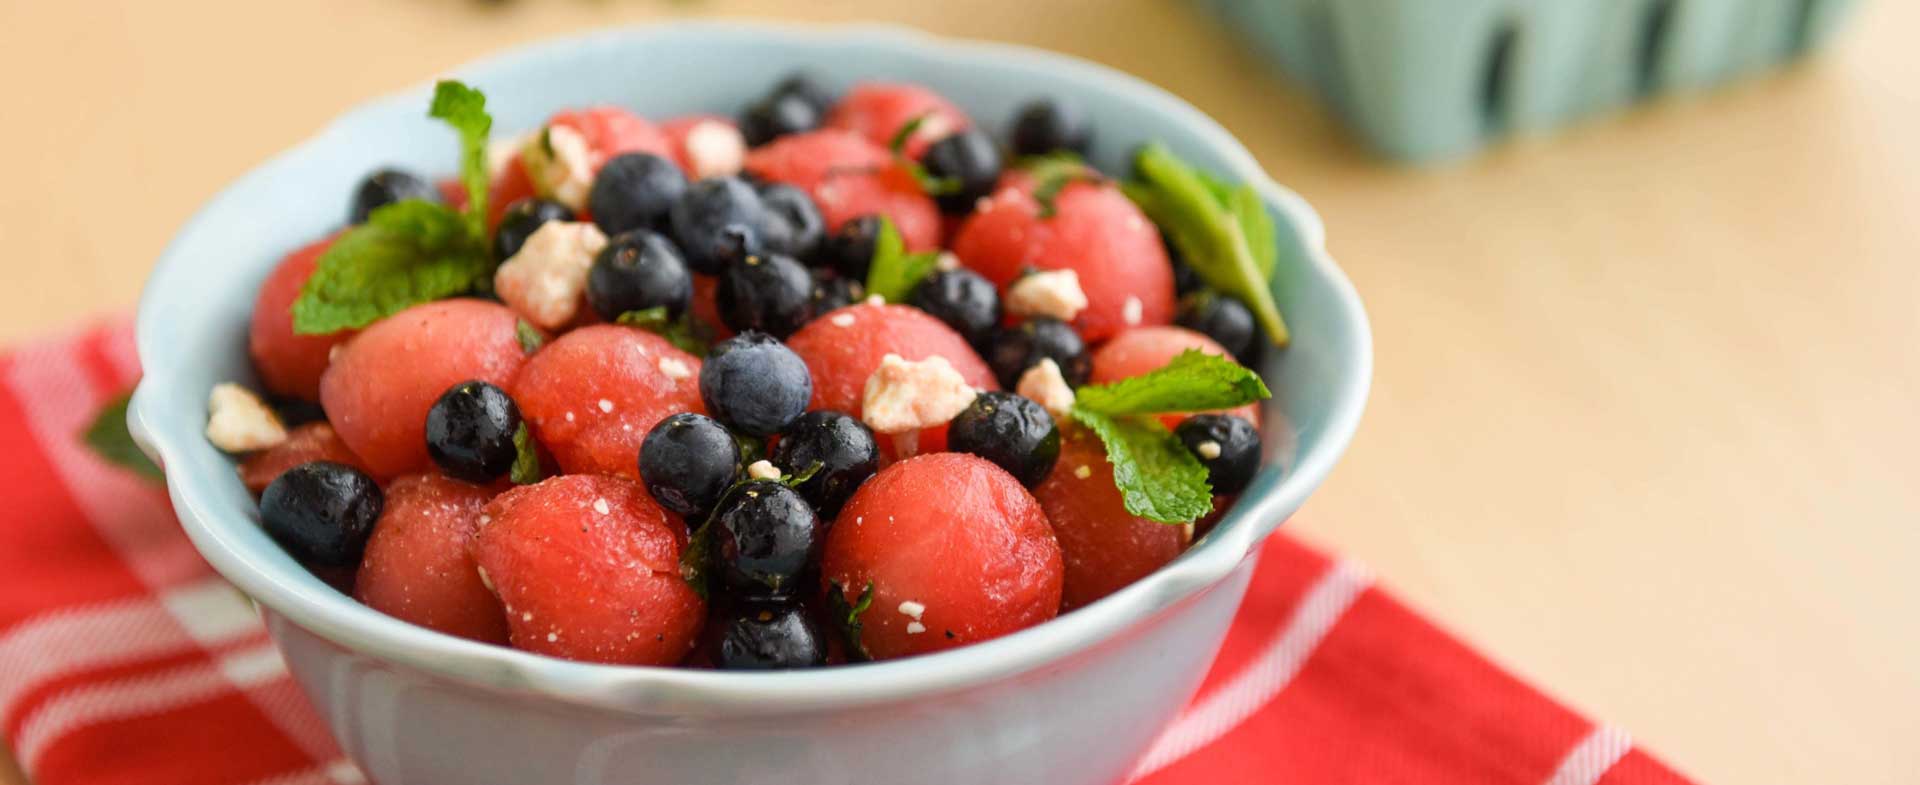 blueberry watermelon salad with feta and mint e1498757939555